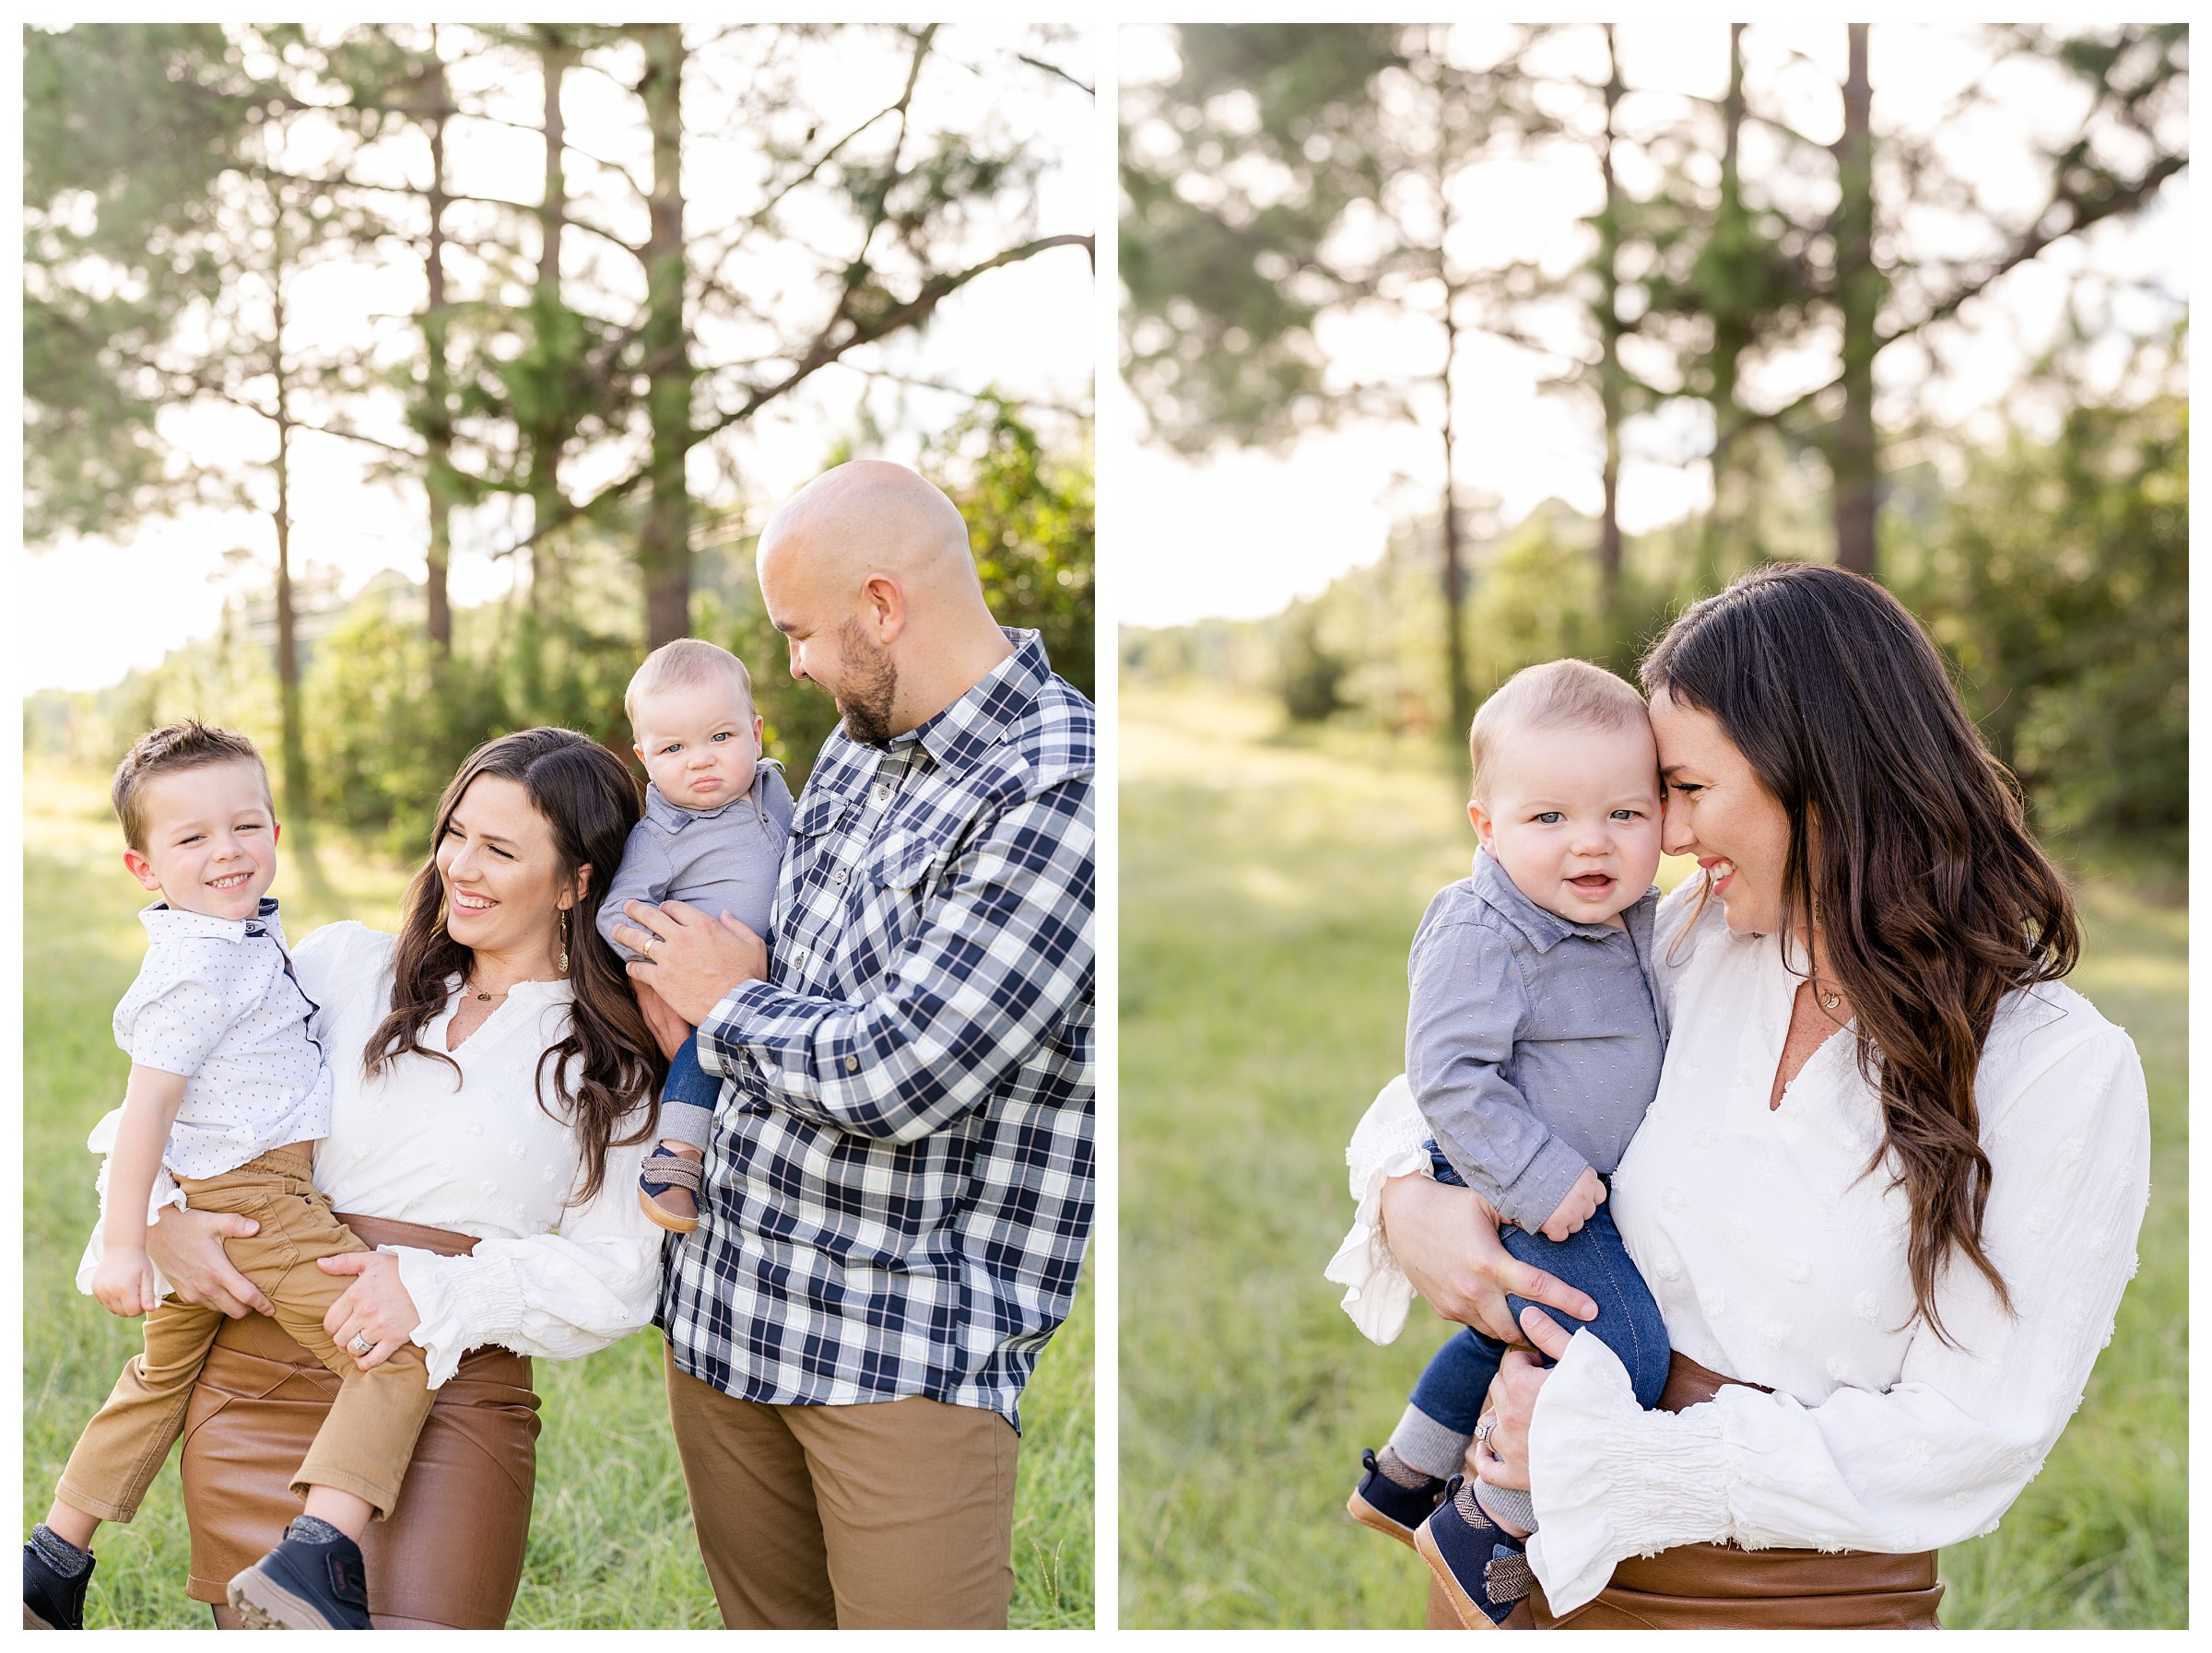 First image is Mom and Dad each holding a little boy while looking at each other and kids looking at camera. Second image is Mom nuzzling little boy she's holding while he laughs at the camera at Cy-Hope